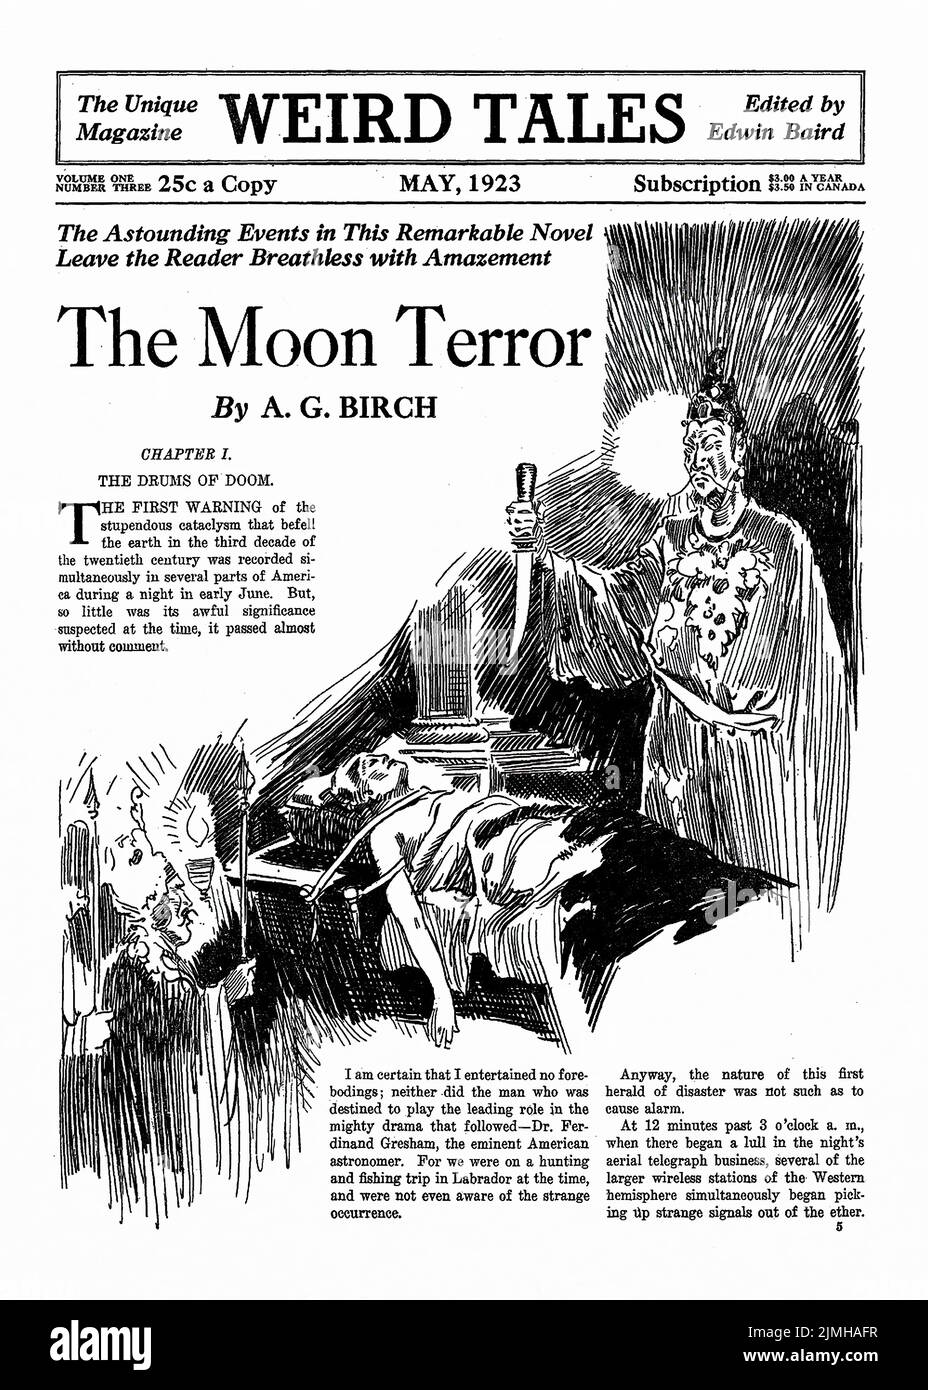 The Moon Terror, by A. G. Birch. Illustration from Weird Tales, May 1923 Stock Photo